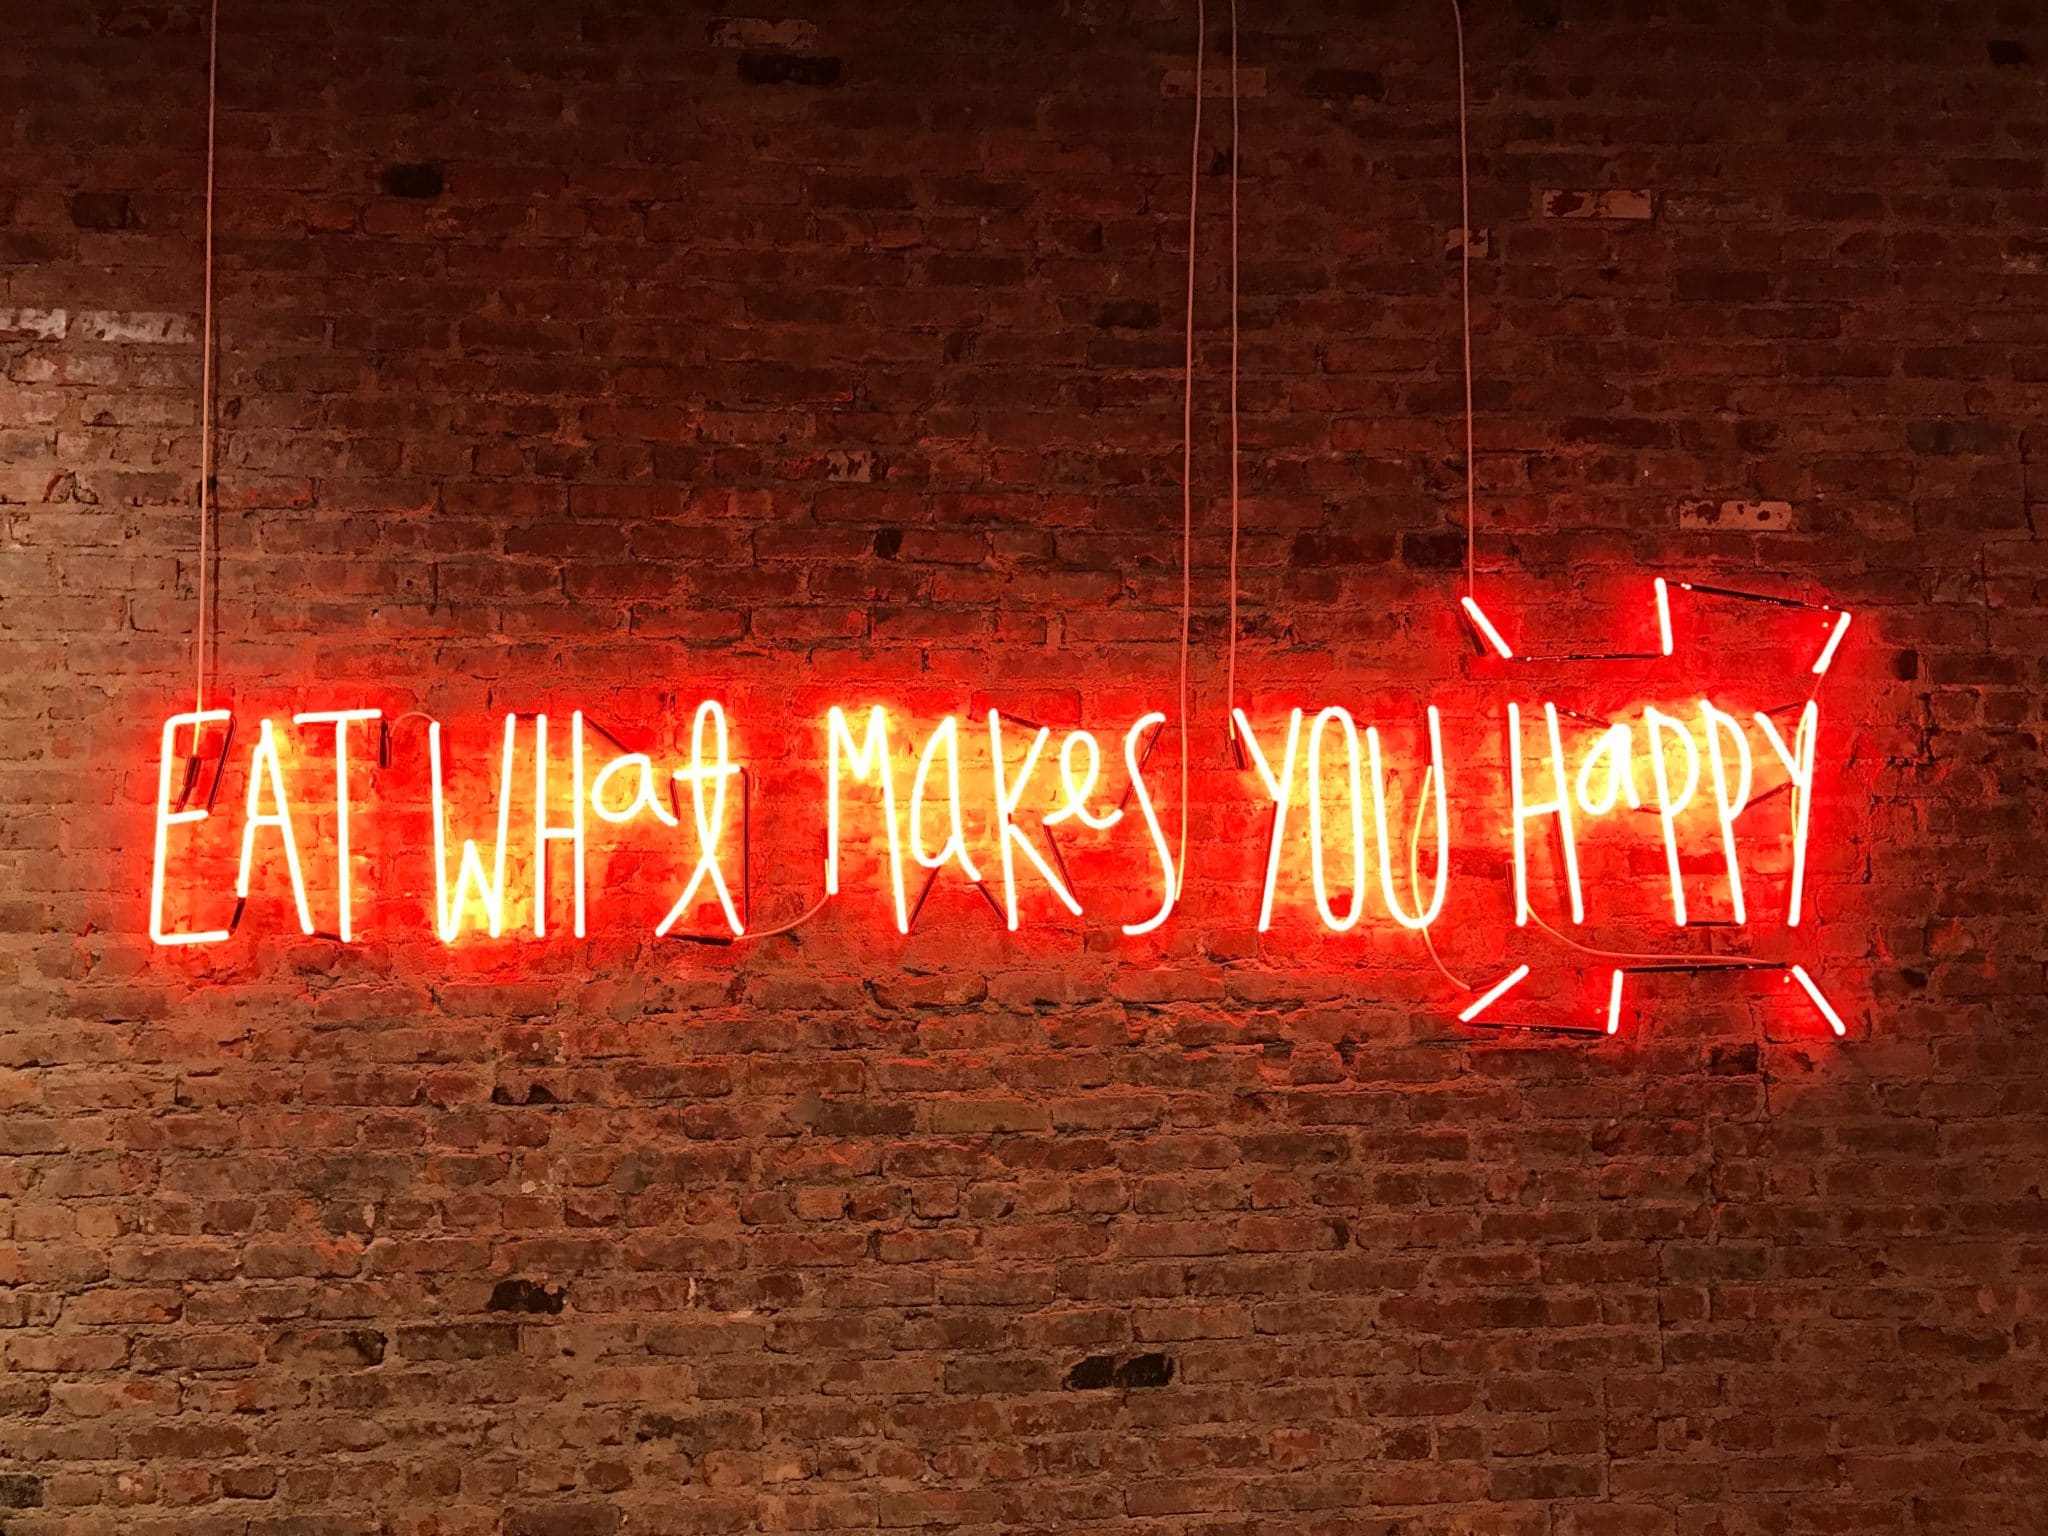 "eat what makes you happy" in lights written on a brick wall 